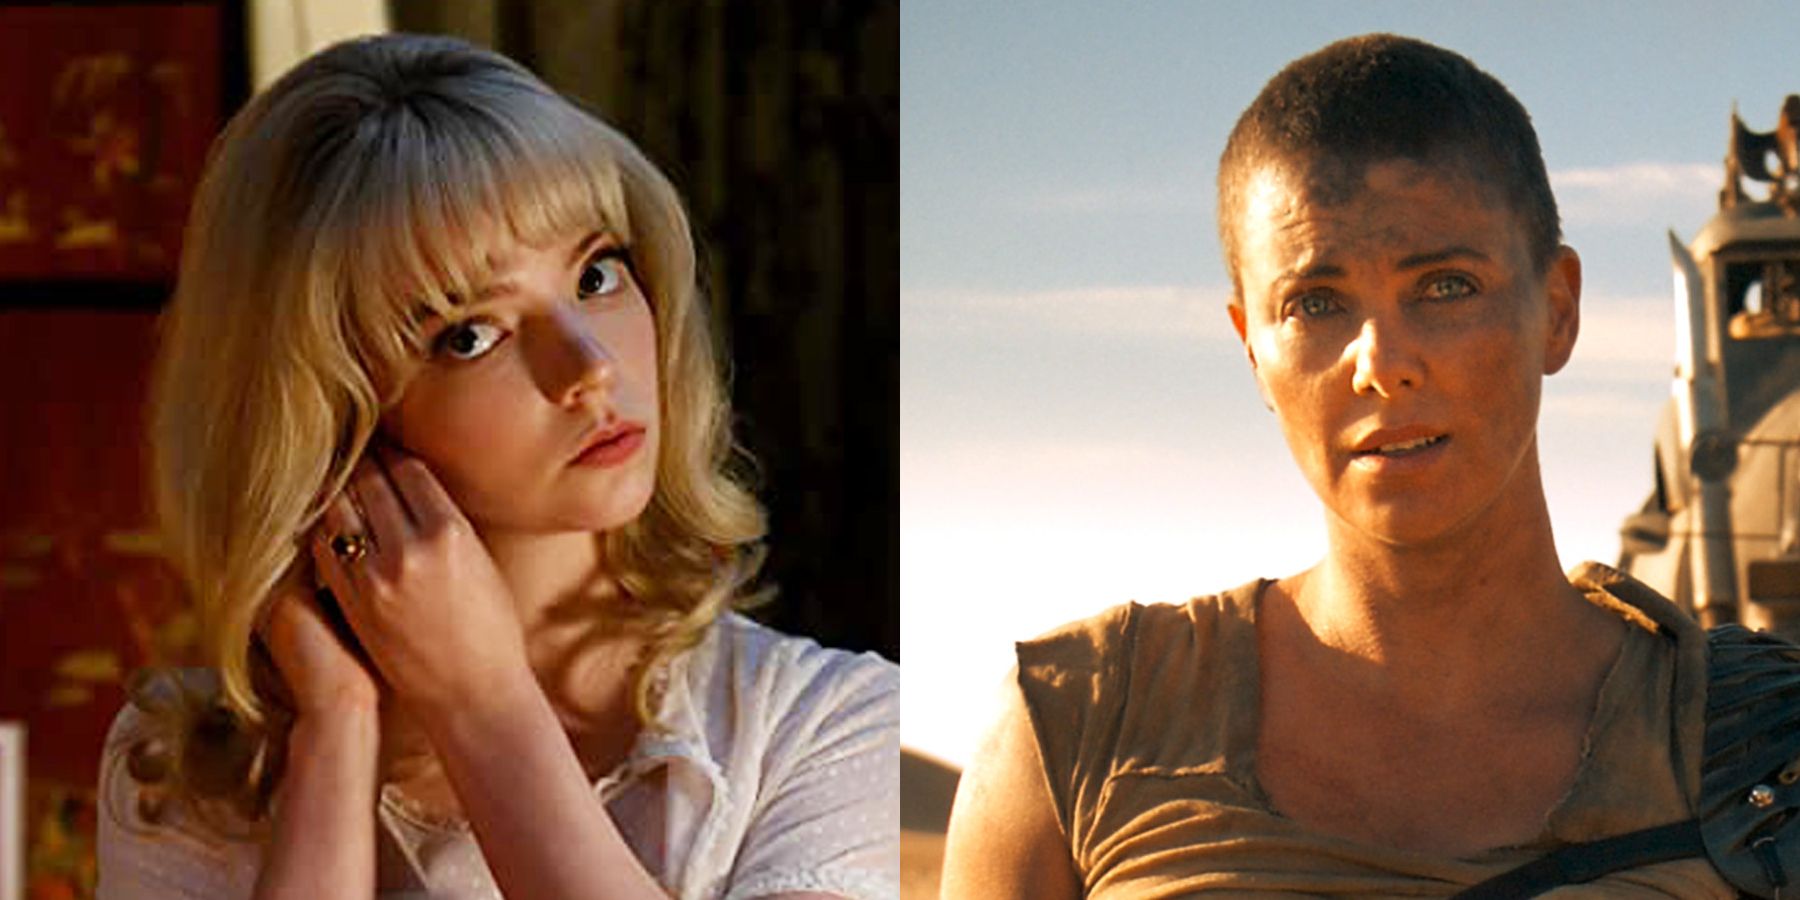 Will Anya Taylor-Joy Shave Her Head for Mad Max Prequel Furiosa?